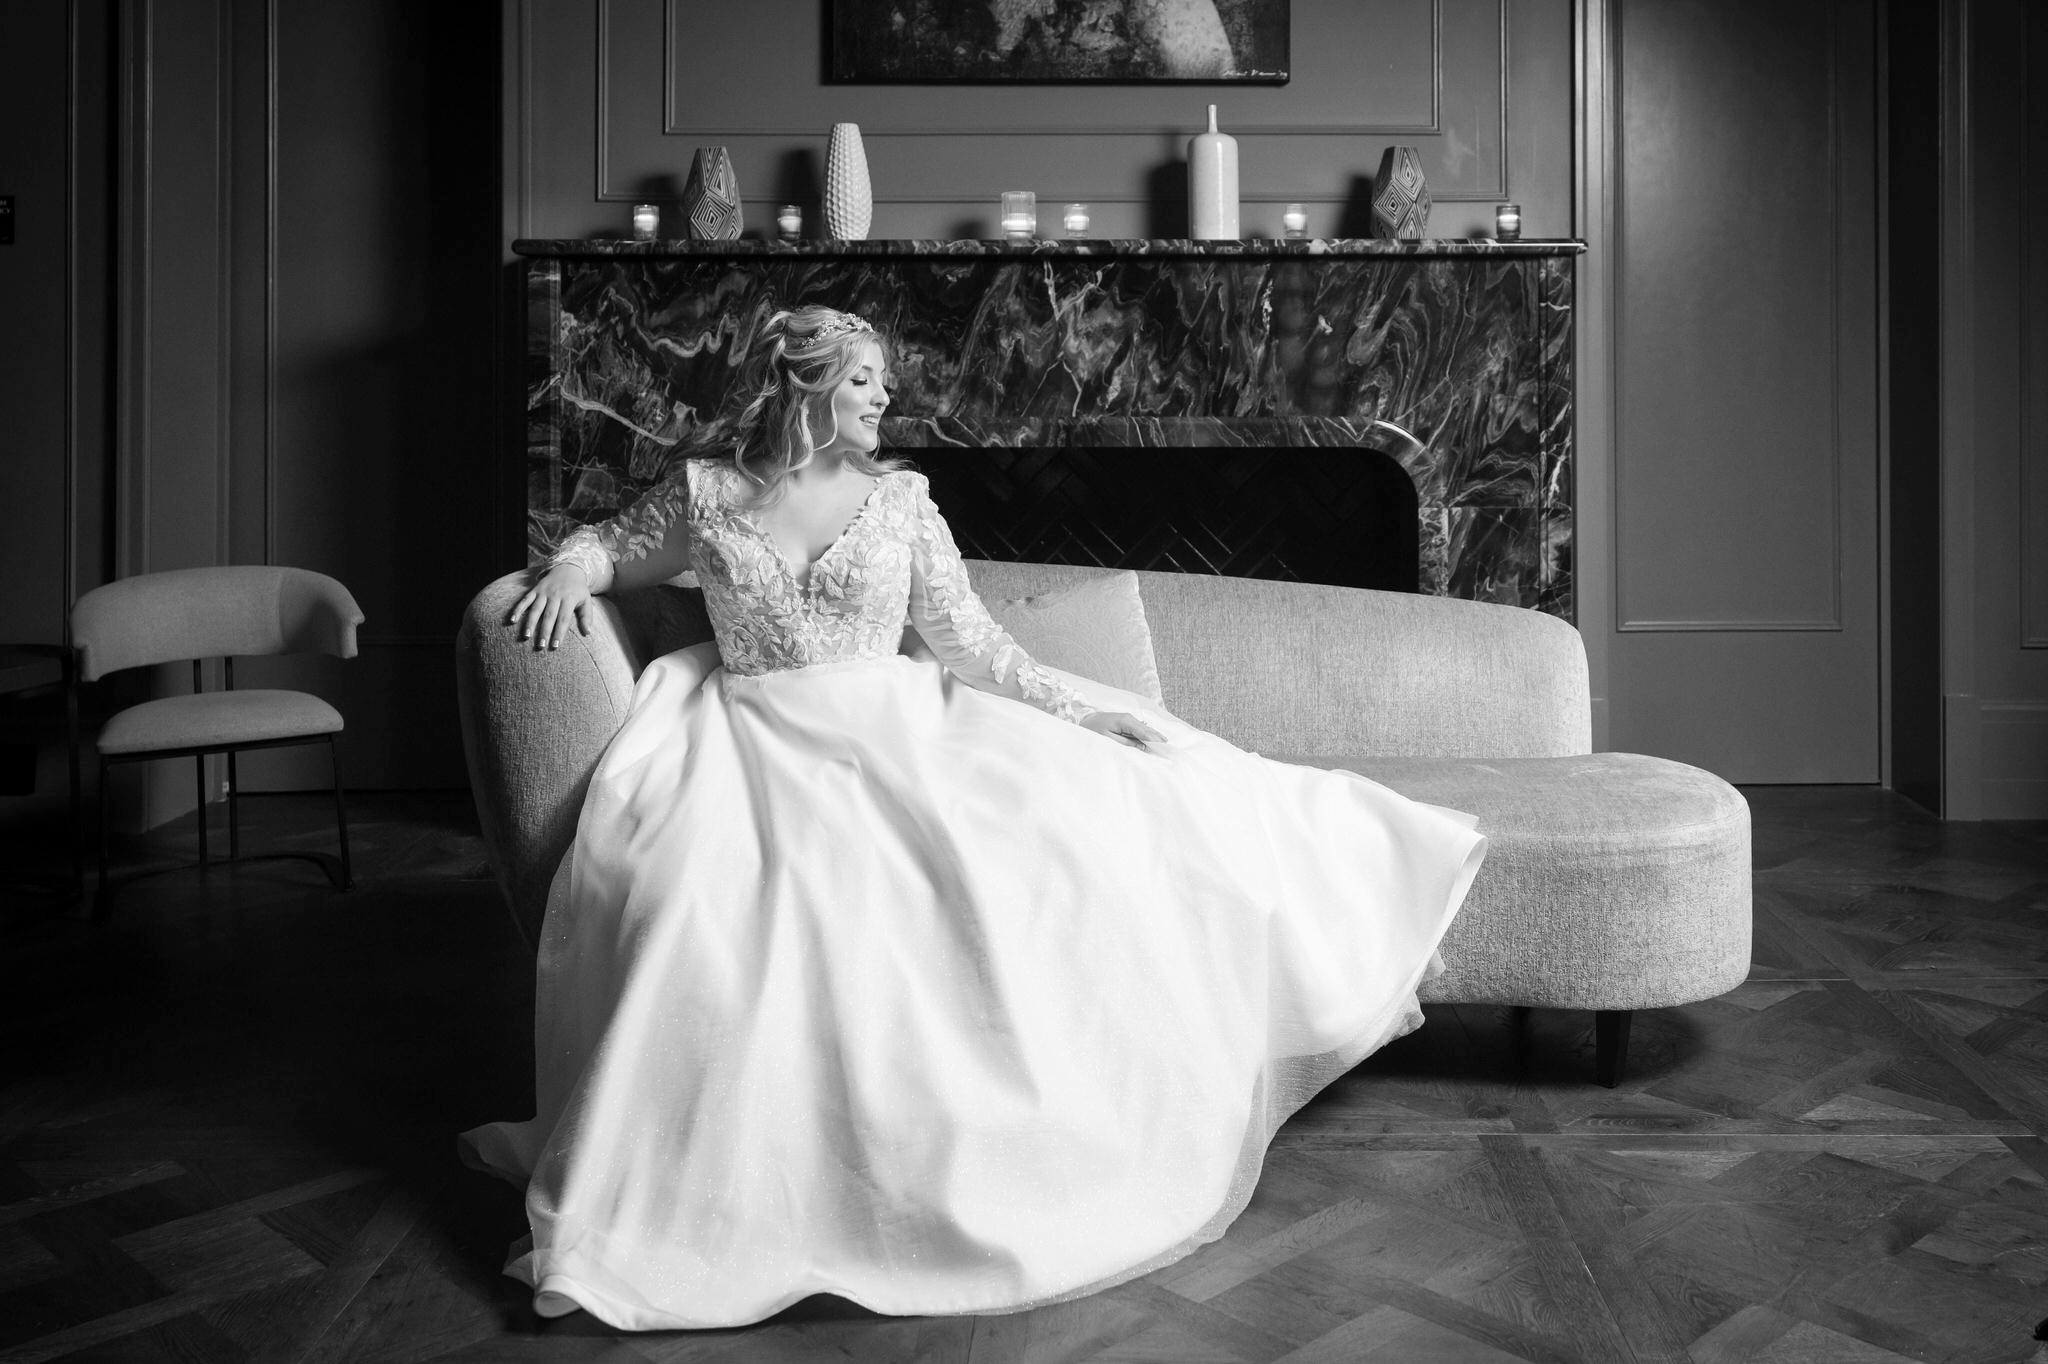 A bride sitting on a chaise lounge poses in a formal fashion at her Daxton Hotel wedding.  